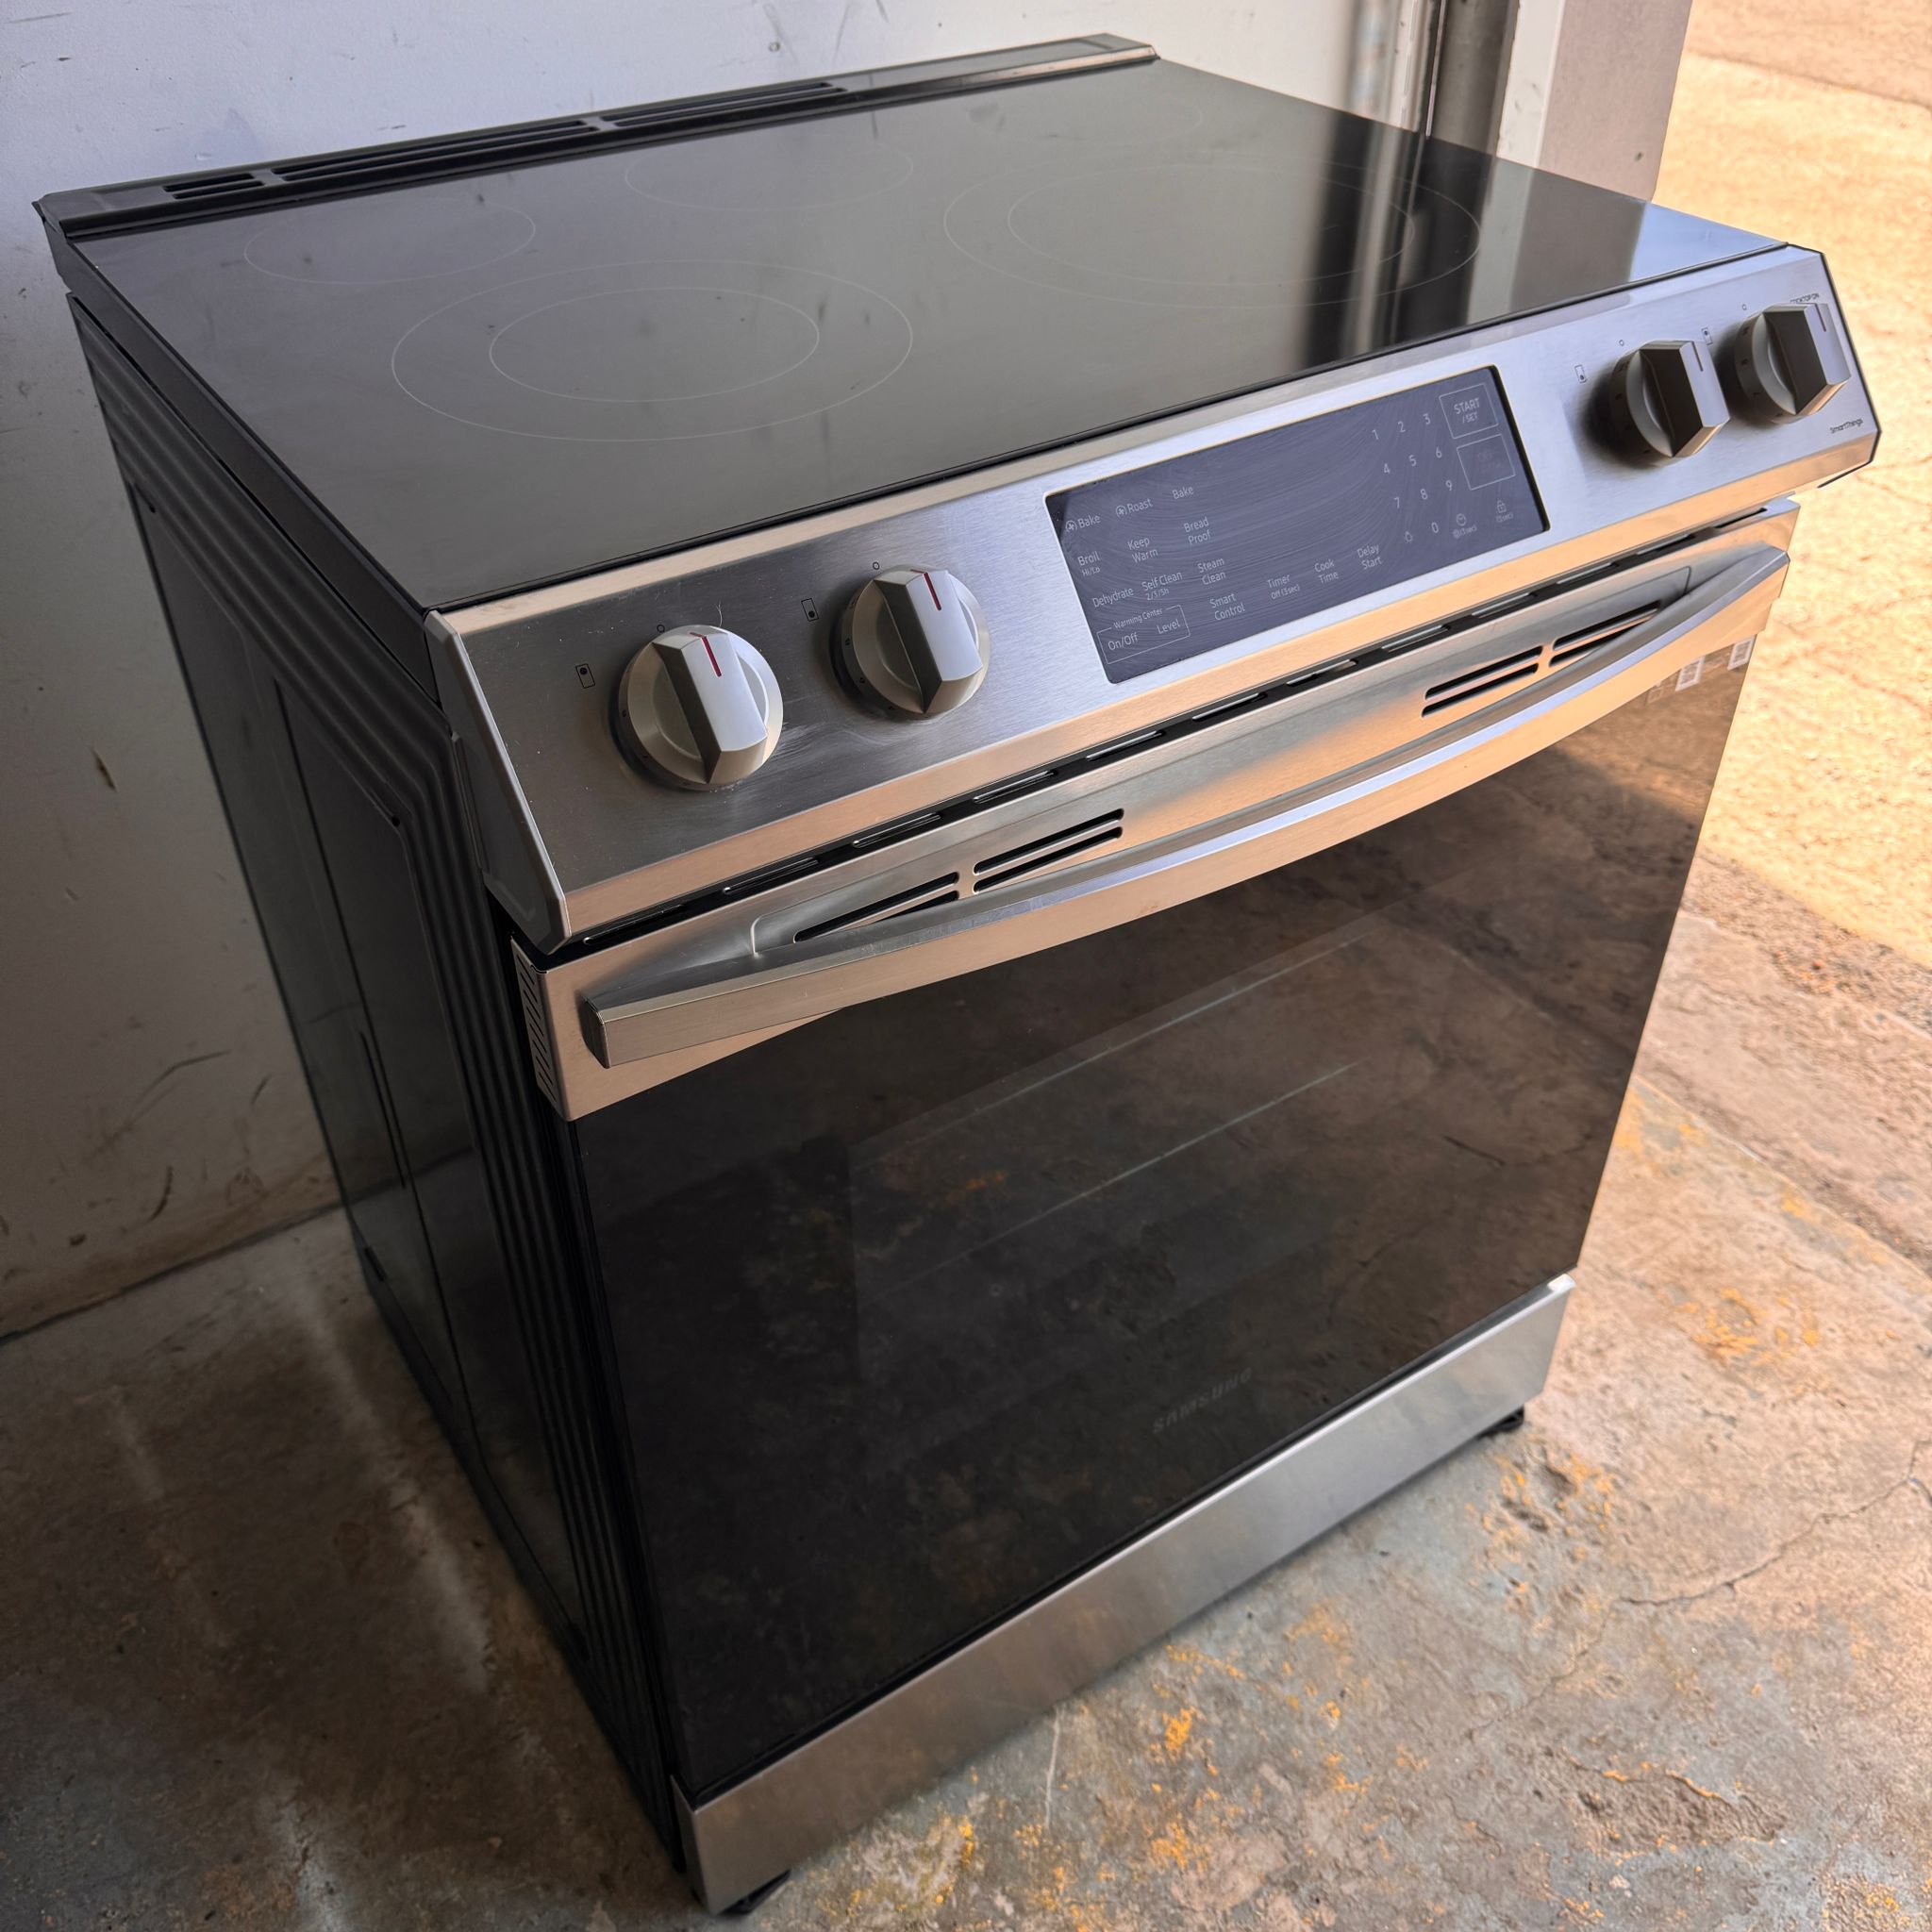 Samsung Stainless Steel Slide-In Electric Stove